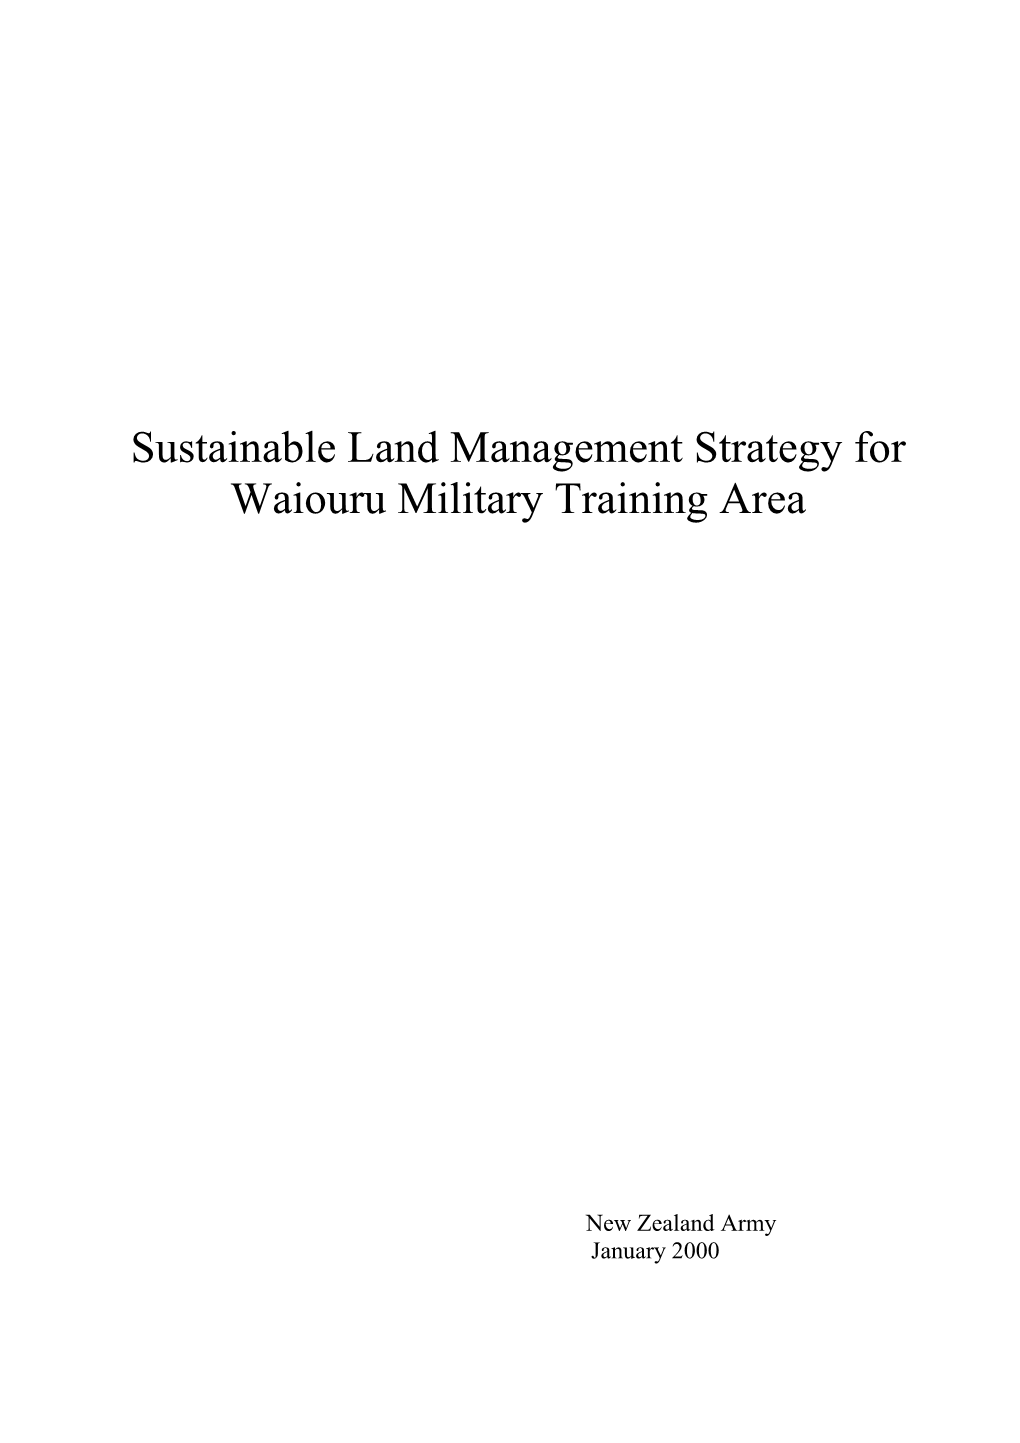 Sustainable Land Management Strategy for Waiouru Military Training Area